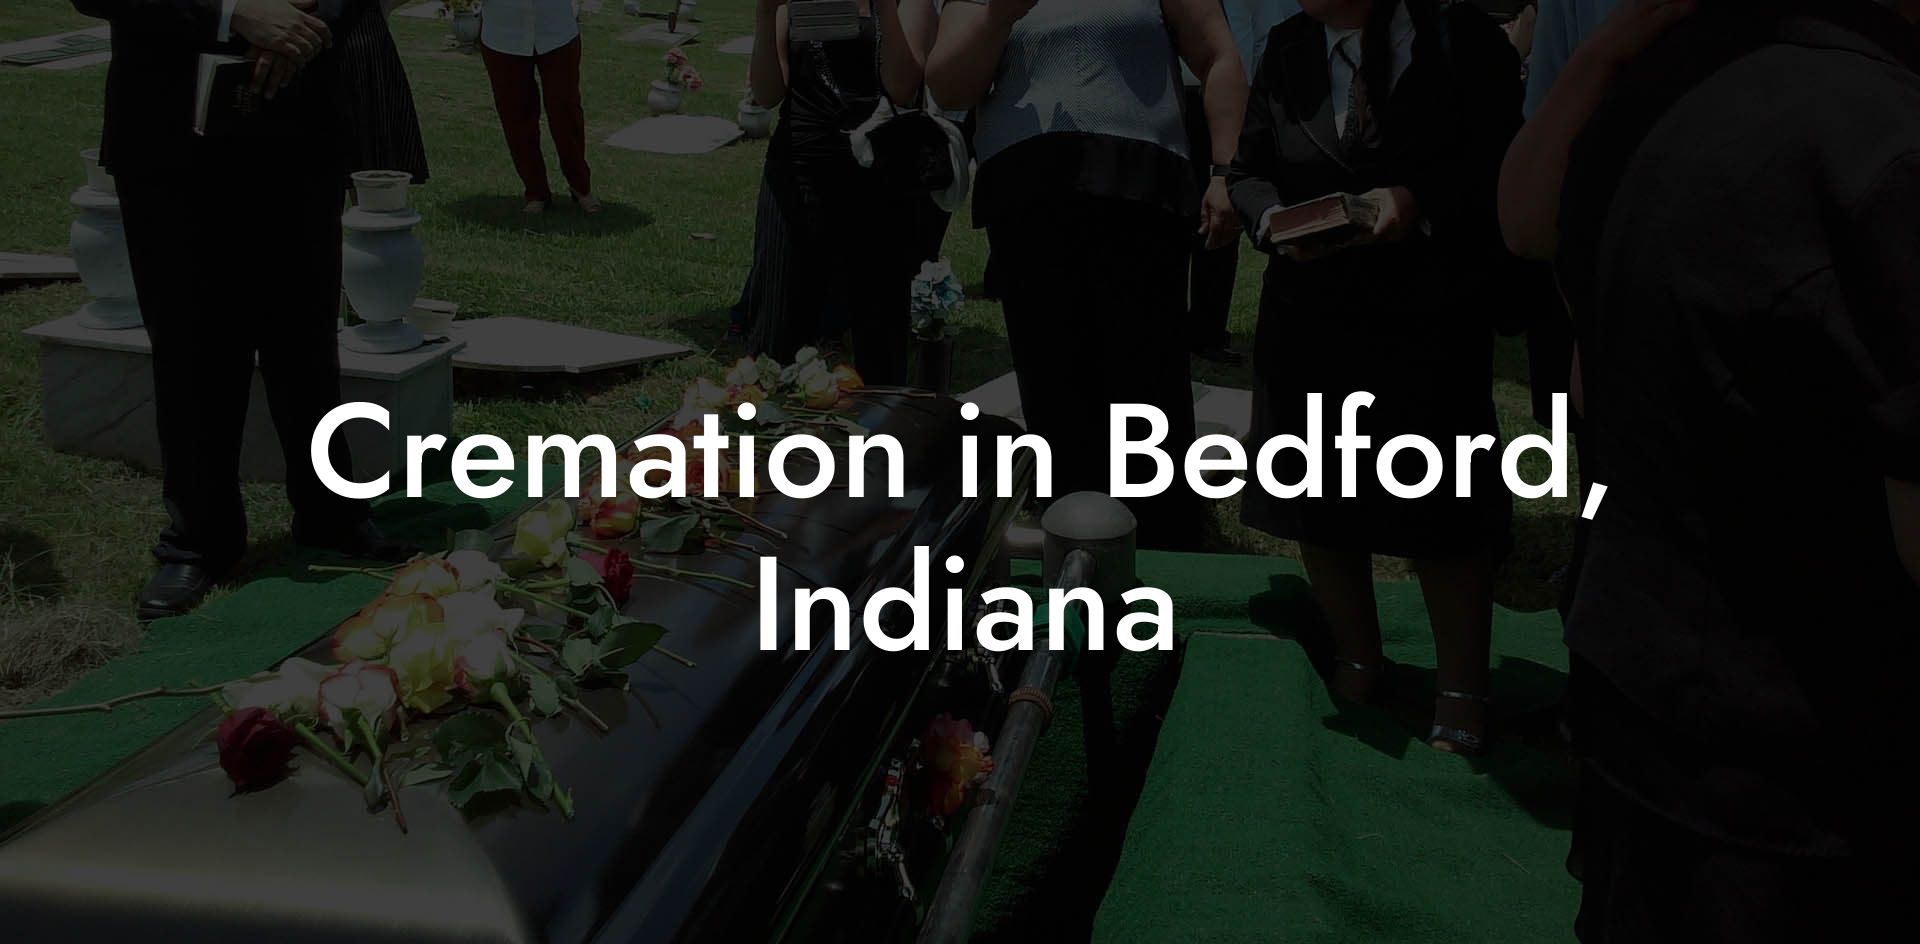 Cremation in Bedford, Indiana